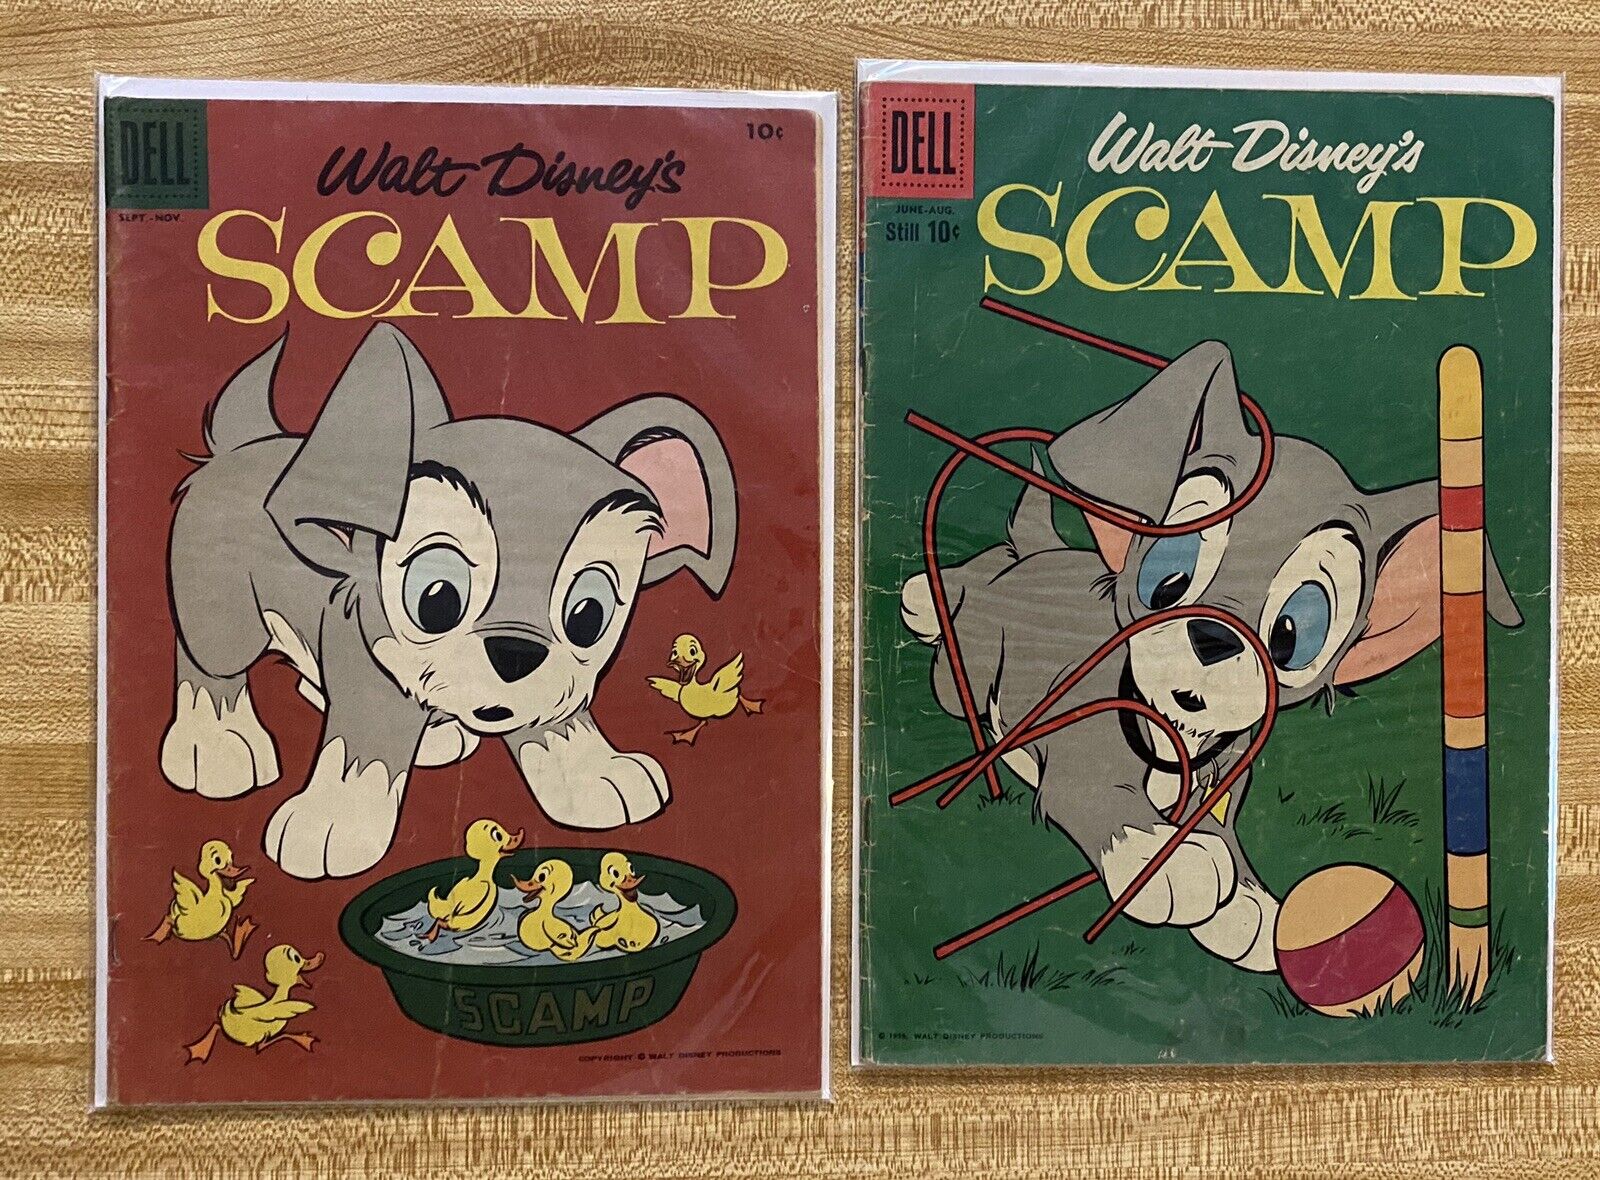 SCAMP #7 TO #14 DELL AND #5 TO #23 GOLDKEY - WALT DISNEY - 7 COMICS